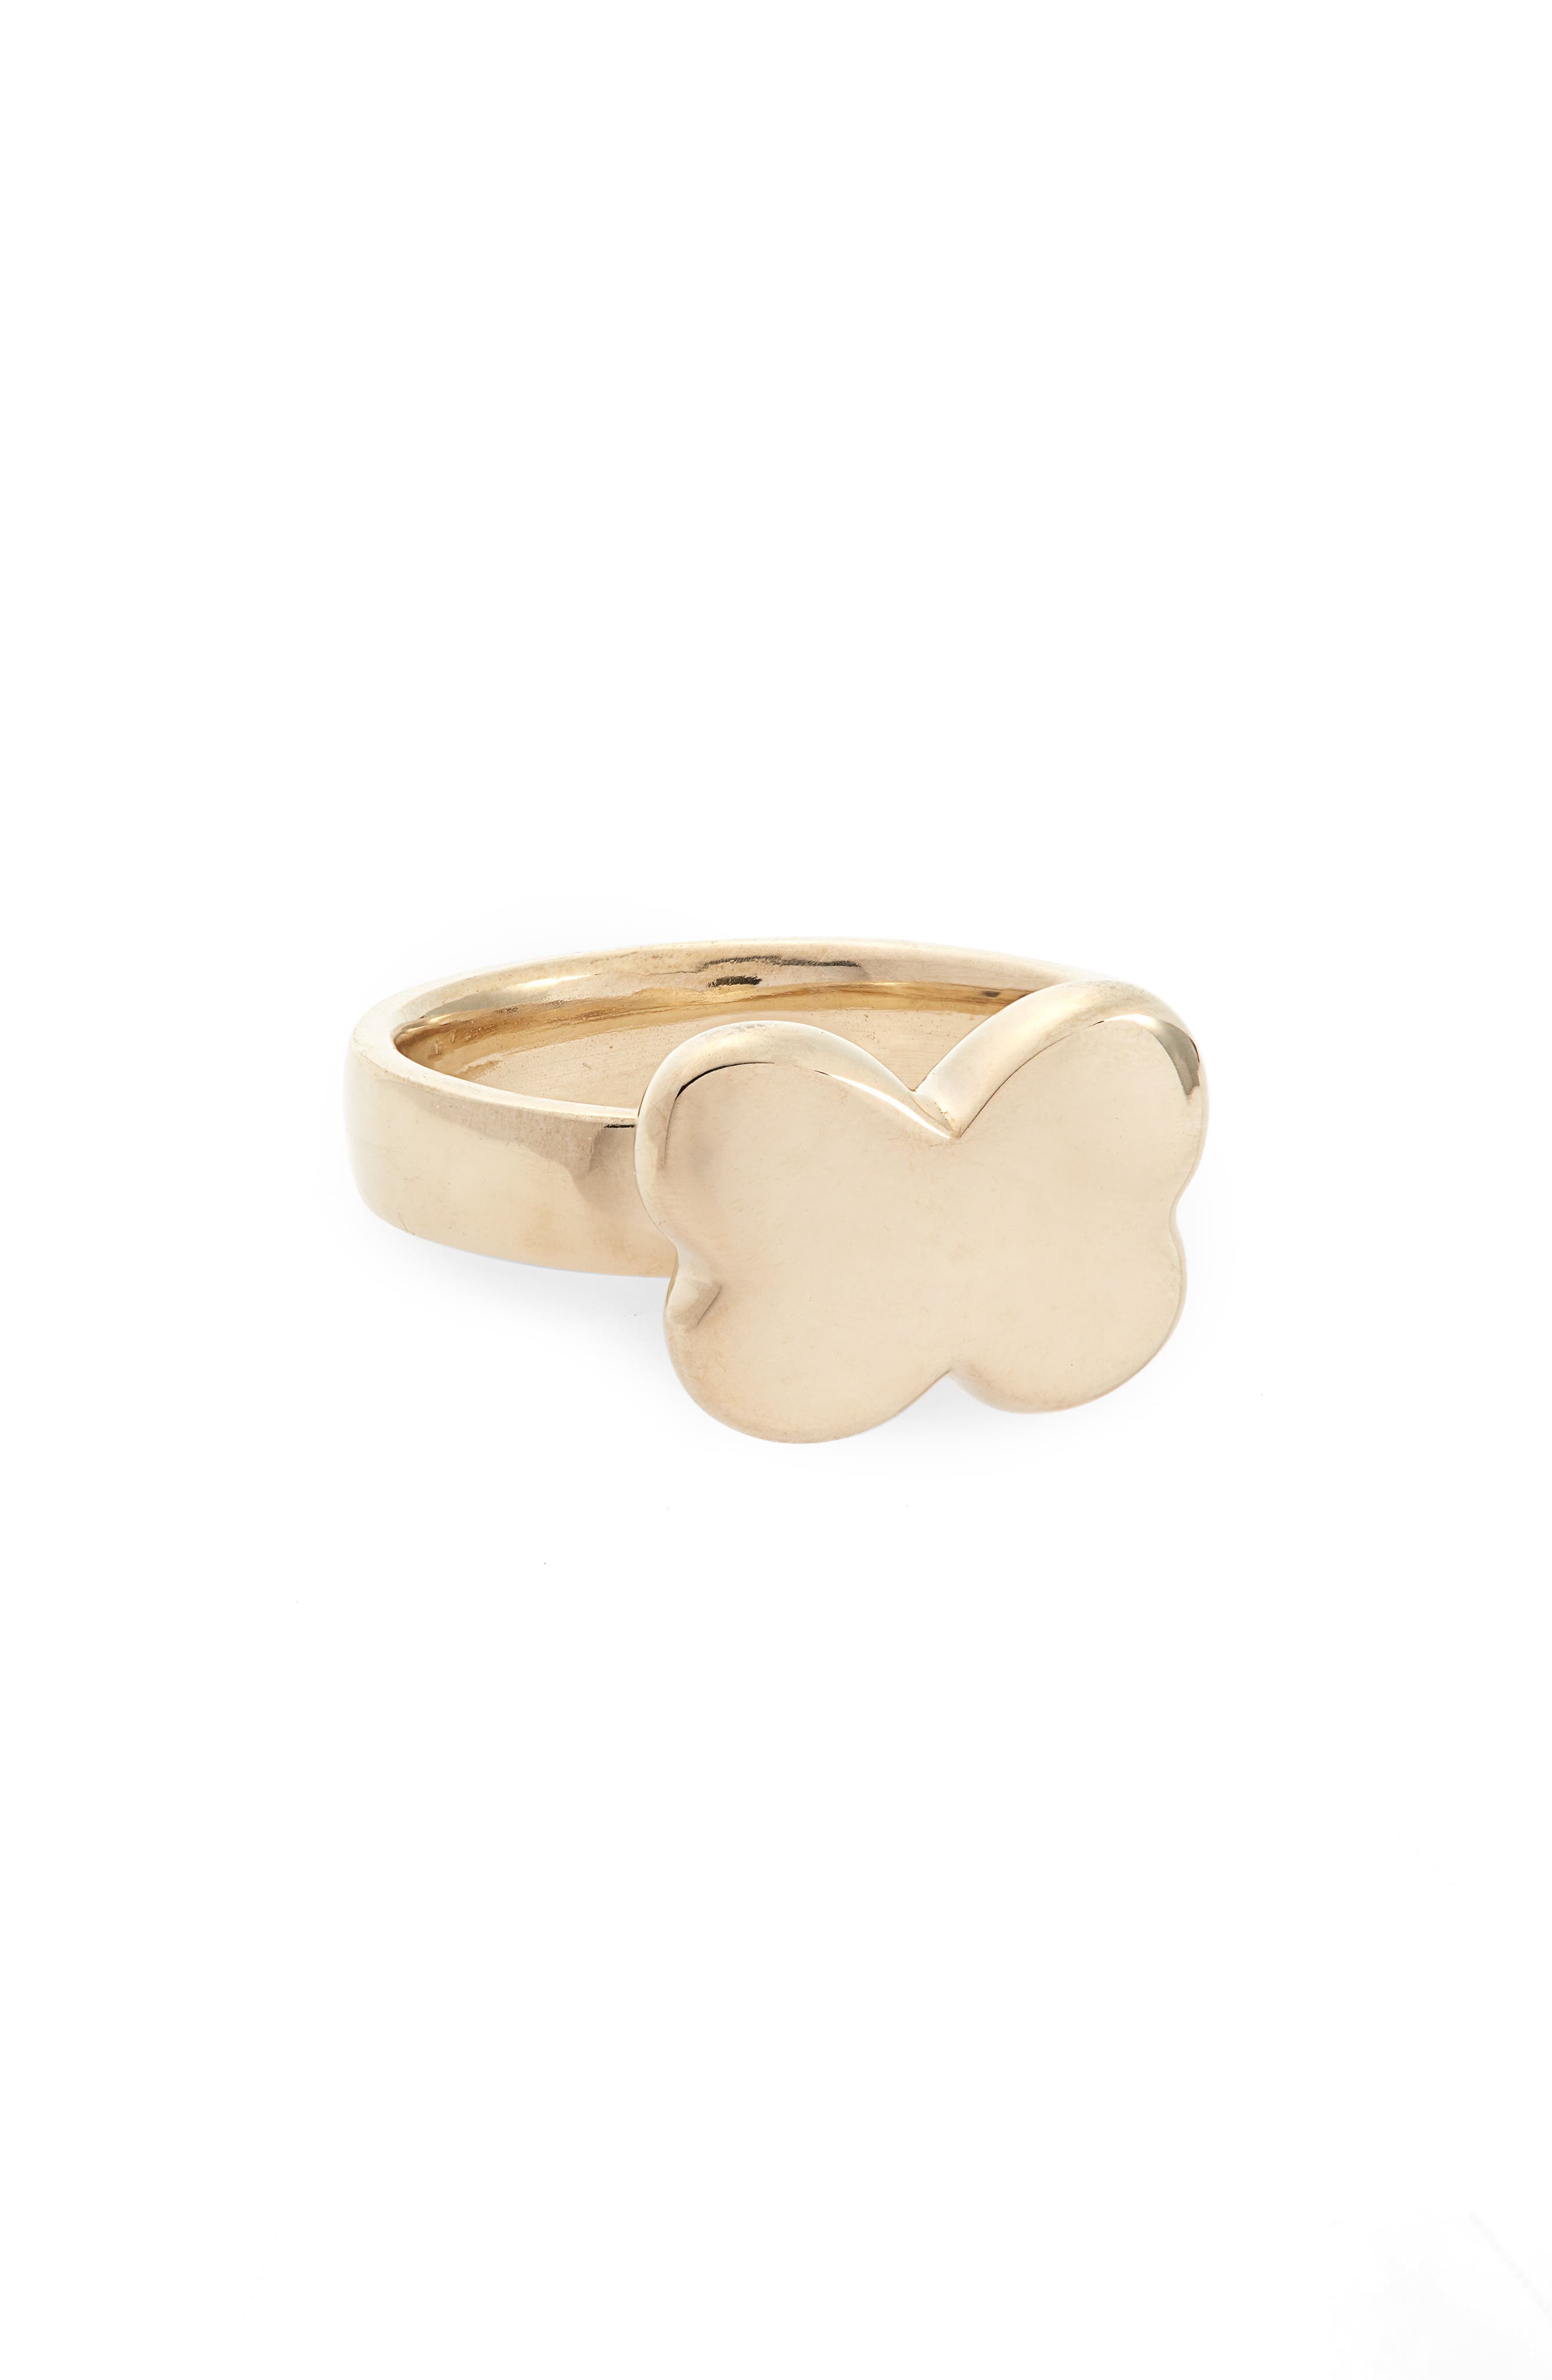 Laura Lombardi Noemi Ring in Raw Brass at Nordstrom, Size 7 Us